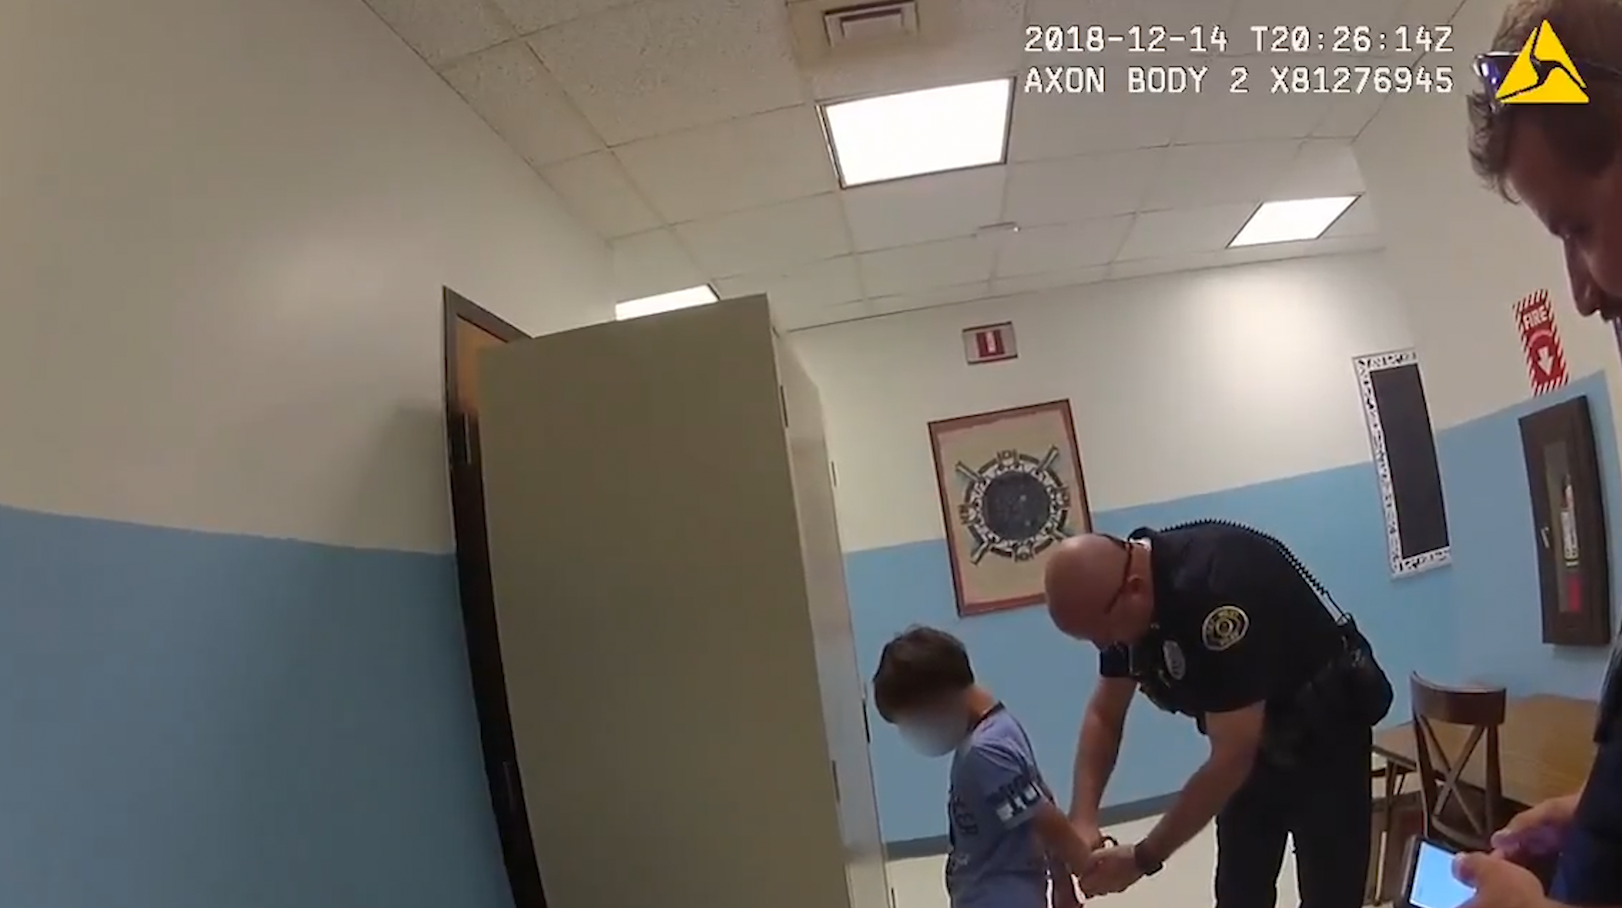 Xix Boy Video - Body-cam video shows 8-year-old Florida boy with disabilities being  arrested - The Washington Post